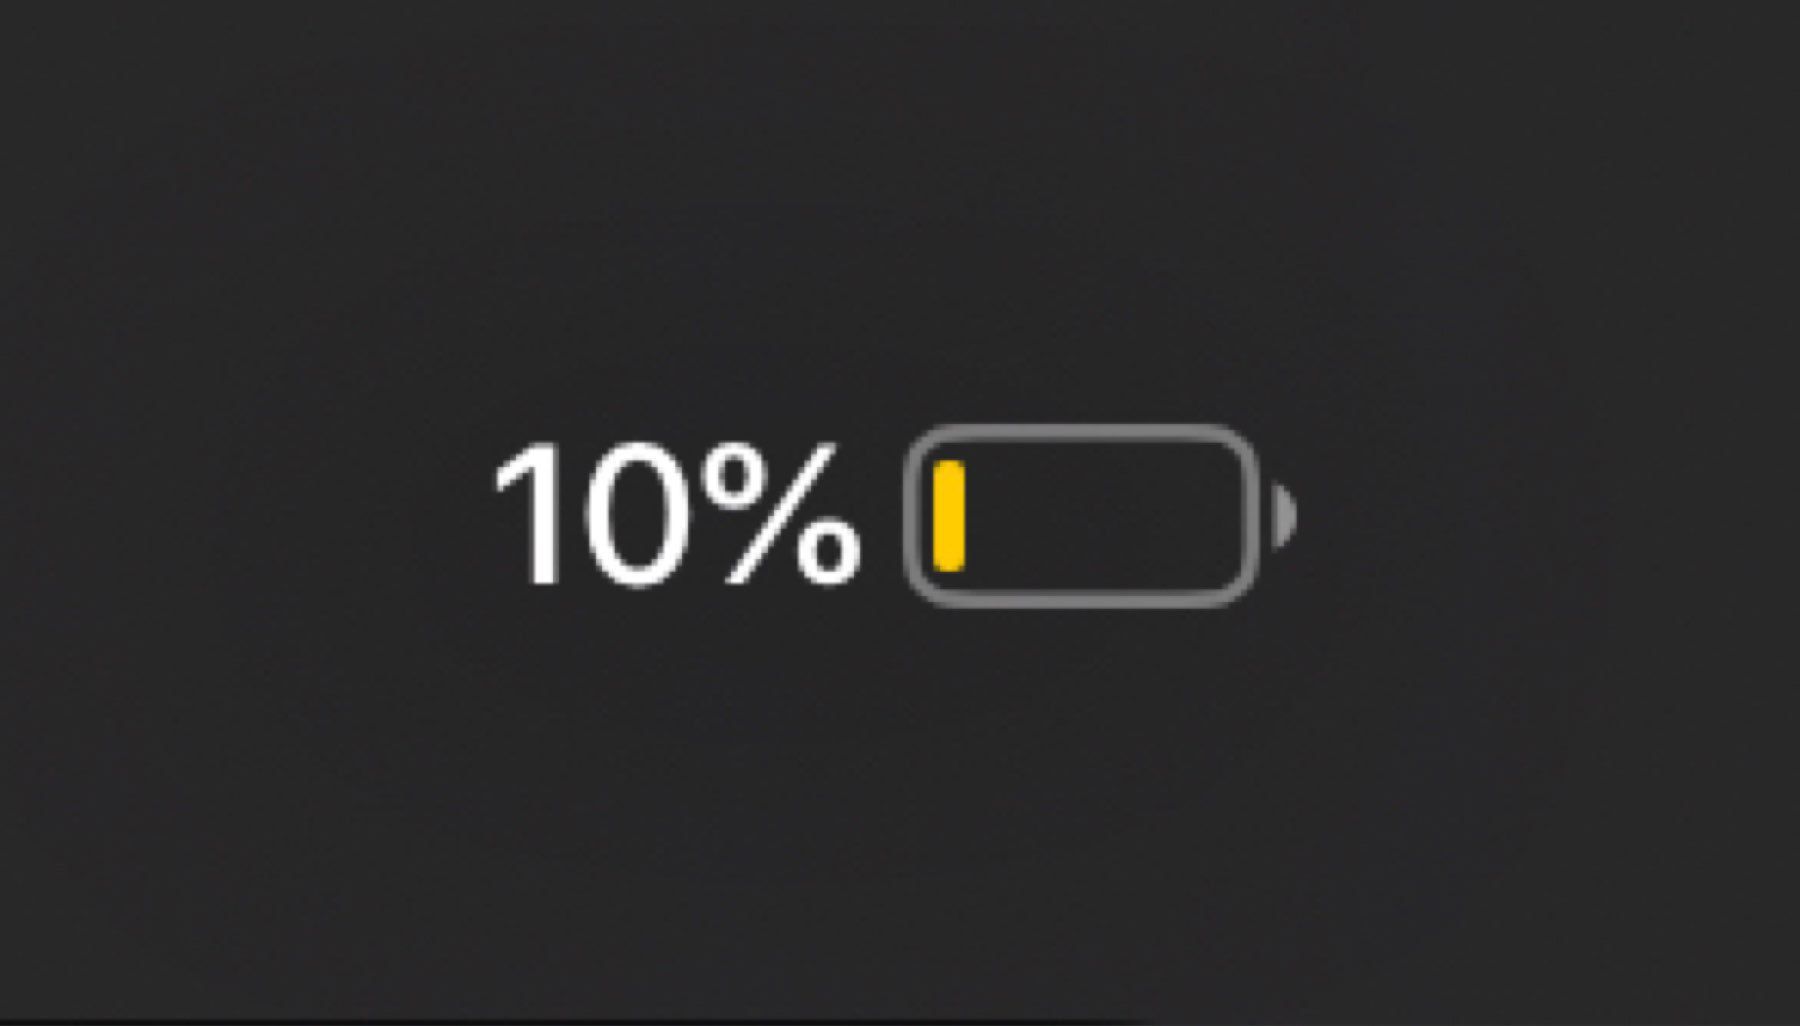 The battery meter showing 10% remaining. 